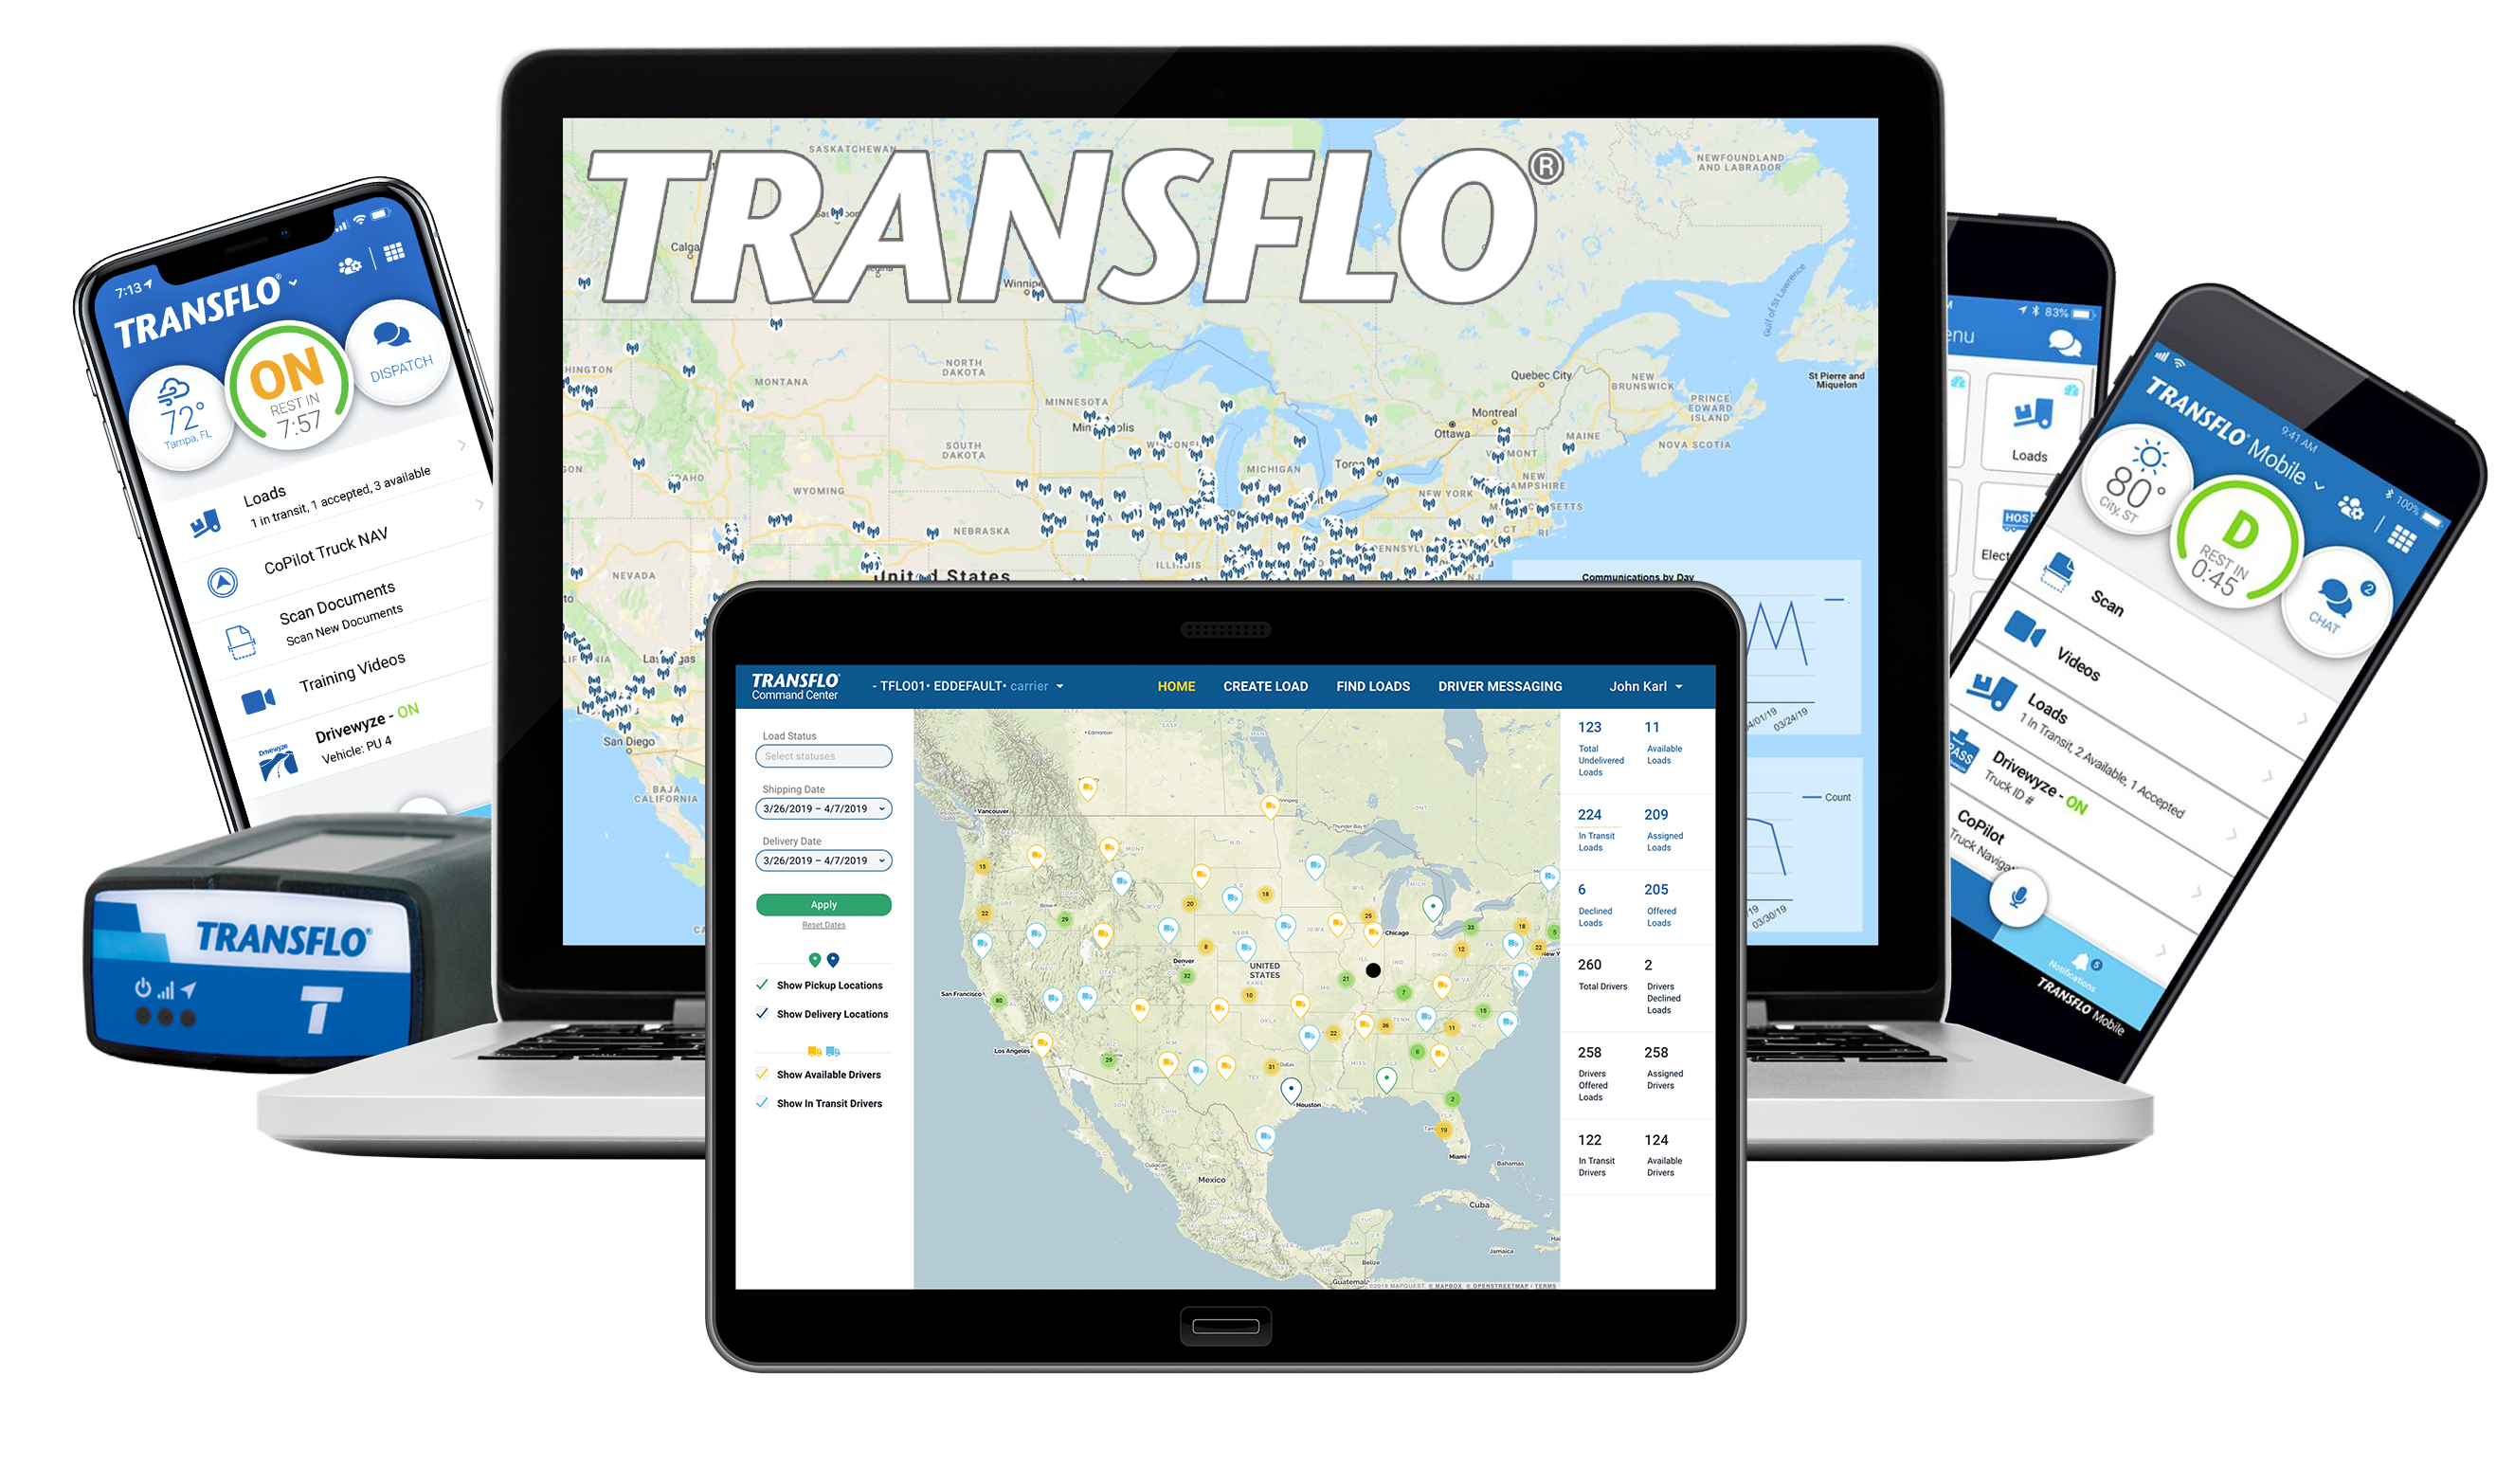 Transflo Bundles its Services to include Electronic Logs, Weigh Station Bypass, and More